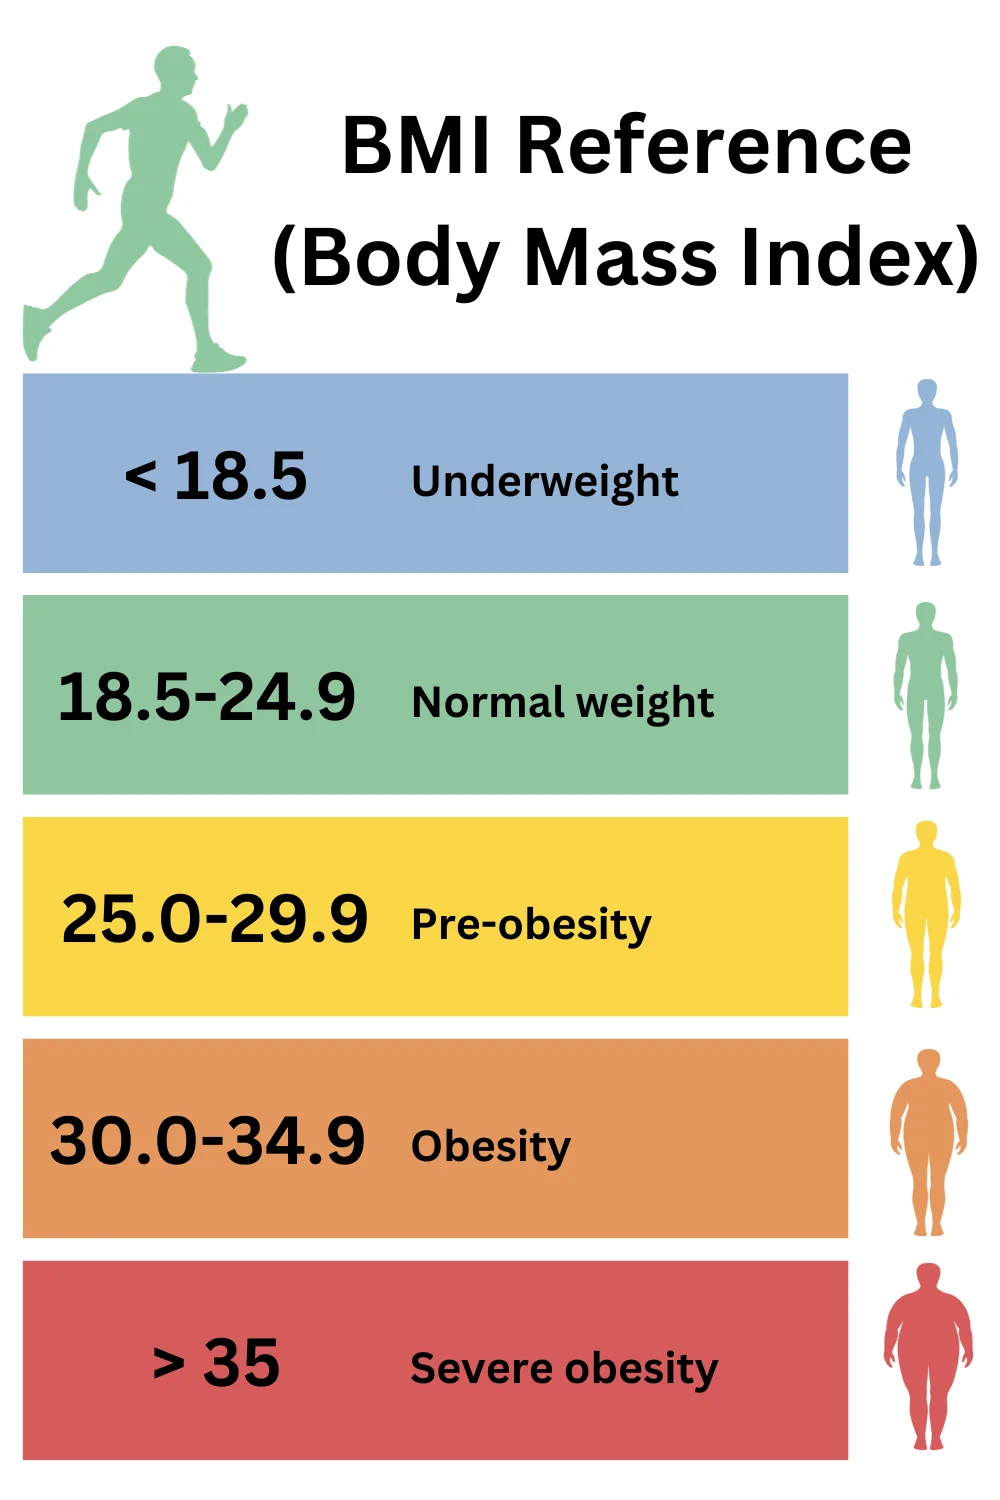 BMI reference ranges